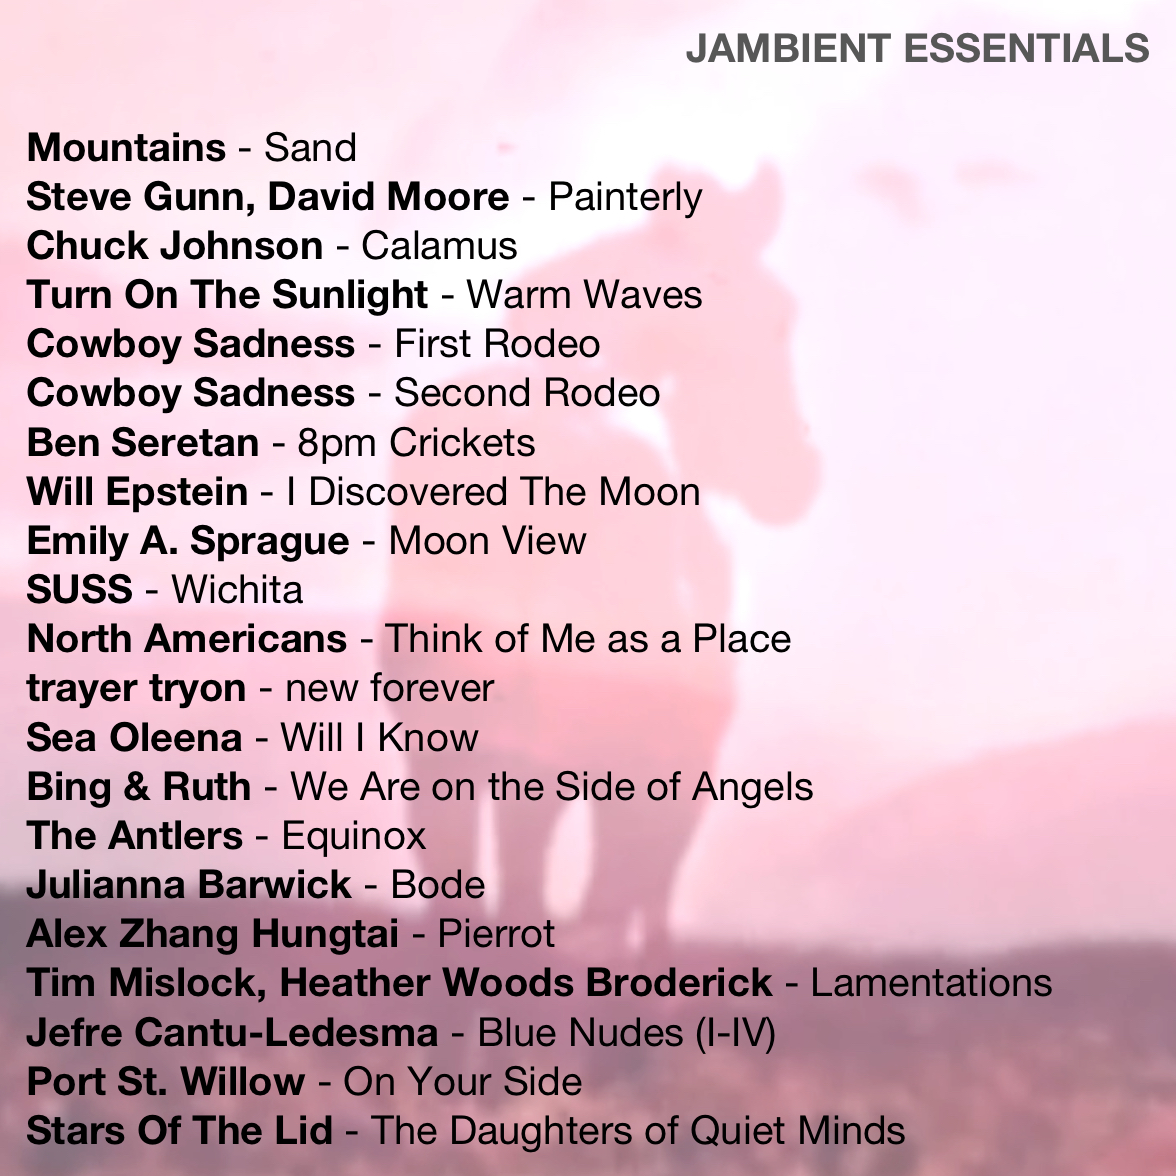 Presenting ‘Jambient Essentials’ - a playlist with friends, collaborators and fellow surfers on the infinite wave. 

the Cowboy Sadness LP is out Friday!
open.spotify.com/playlist/7eEy3…